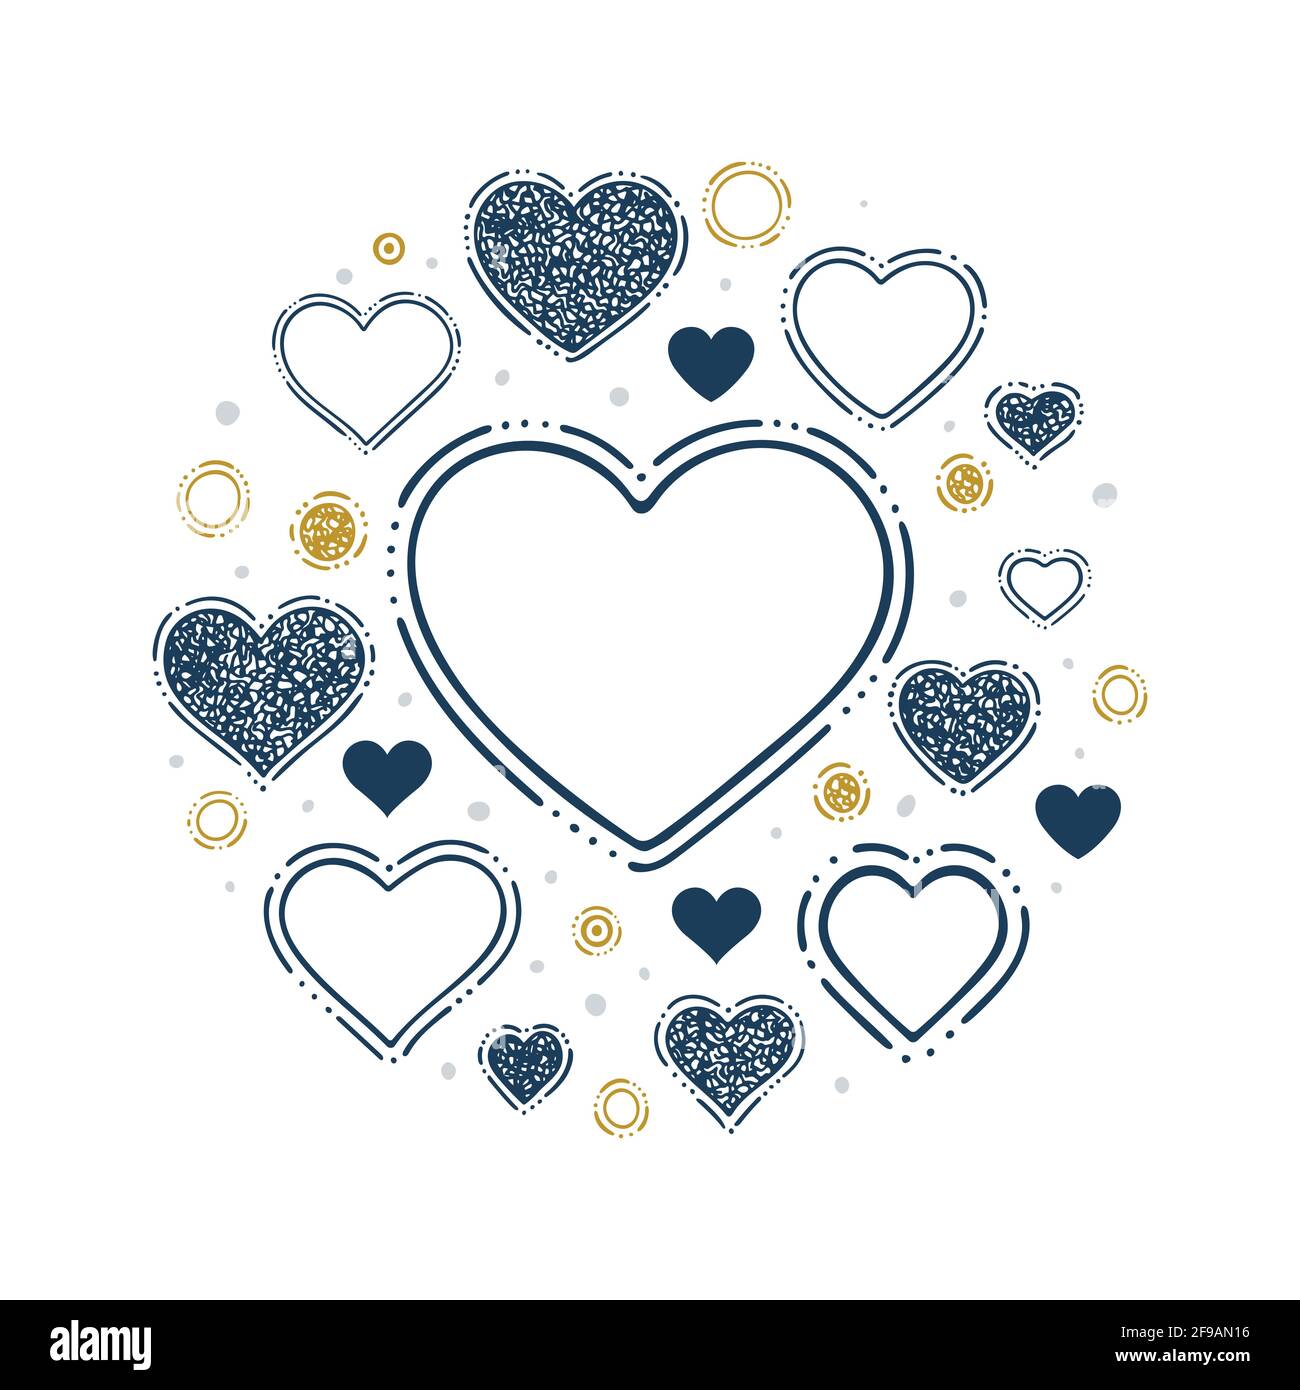 Hearts. Hand drawn hearts outline icons and design elements. Doodle drawing different hearts symbols illustration. Part of set. Stock Vector